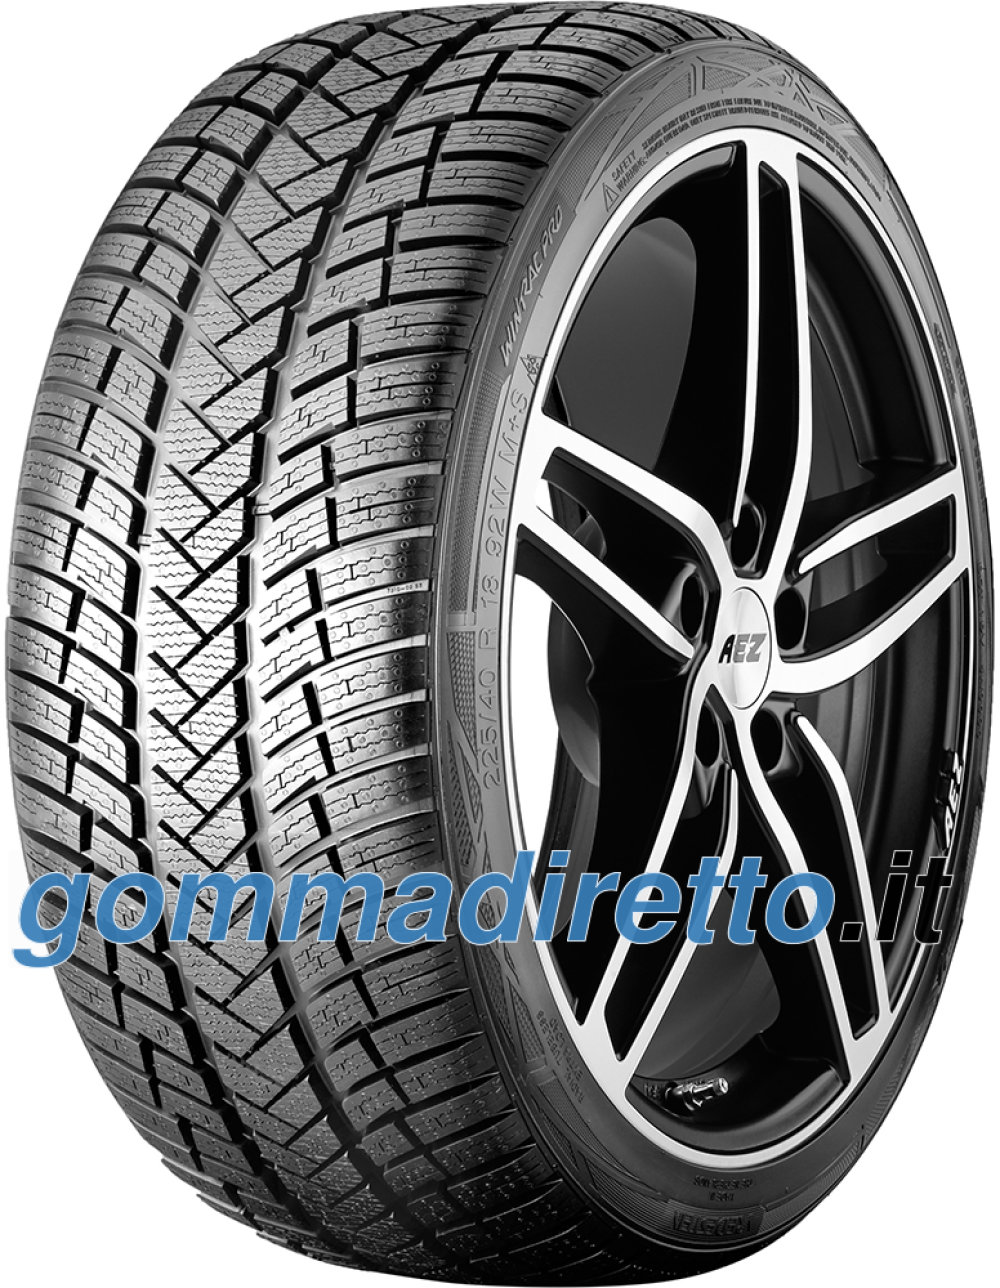 Image of Vredestein Wintrac Pro ( 225/60 R17 103H XL )